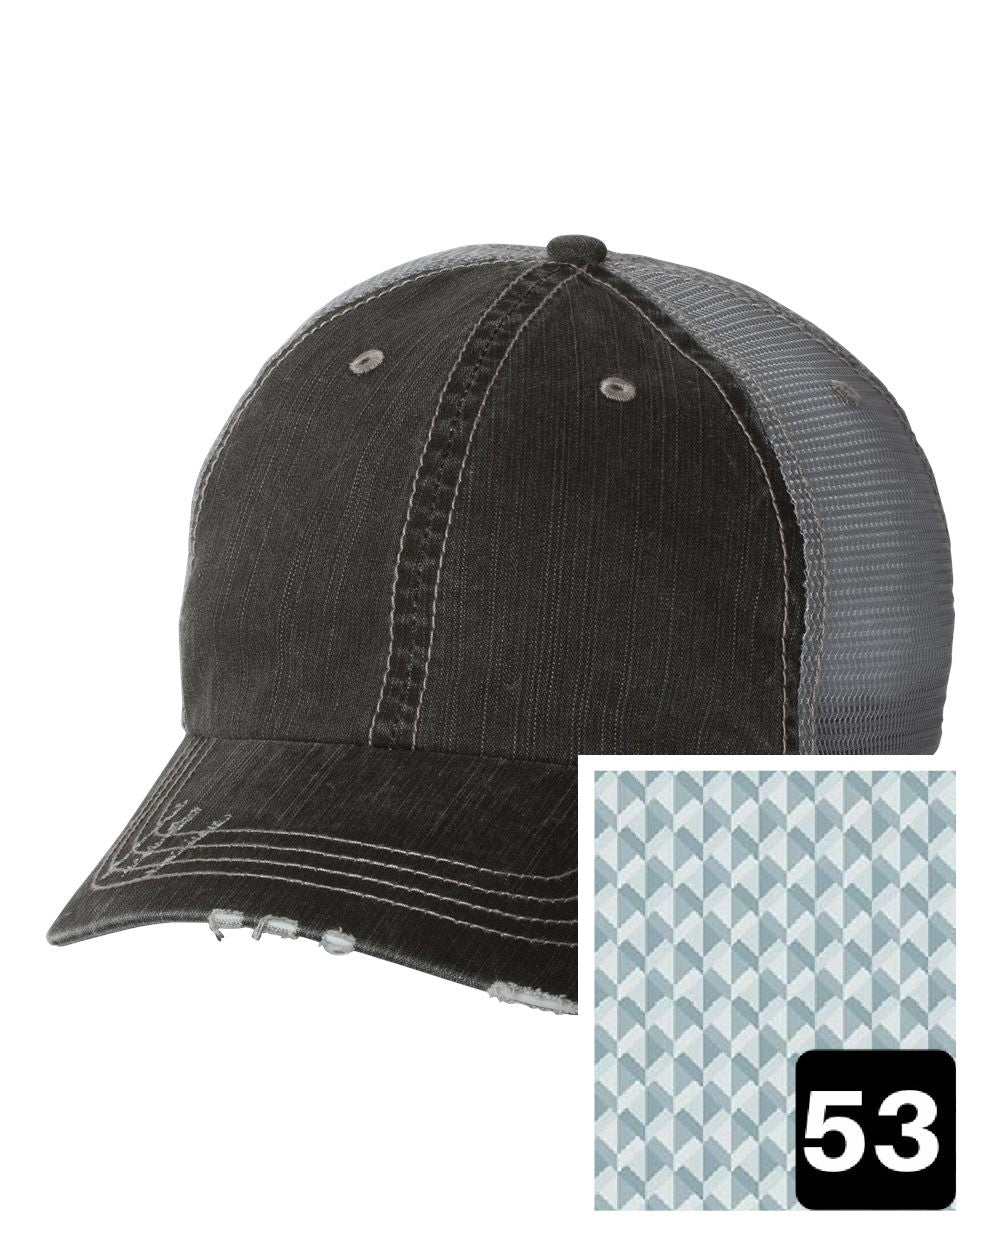 gray distressed trucker hat with multi-color stripe fabric state of Wyoming